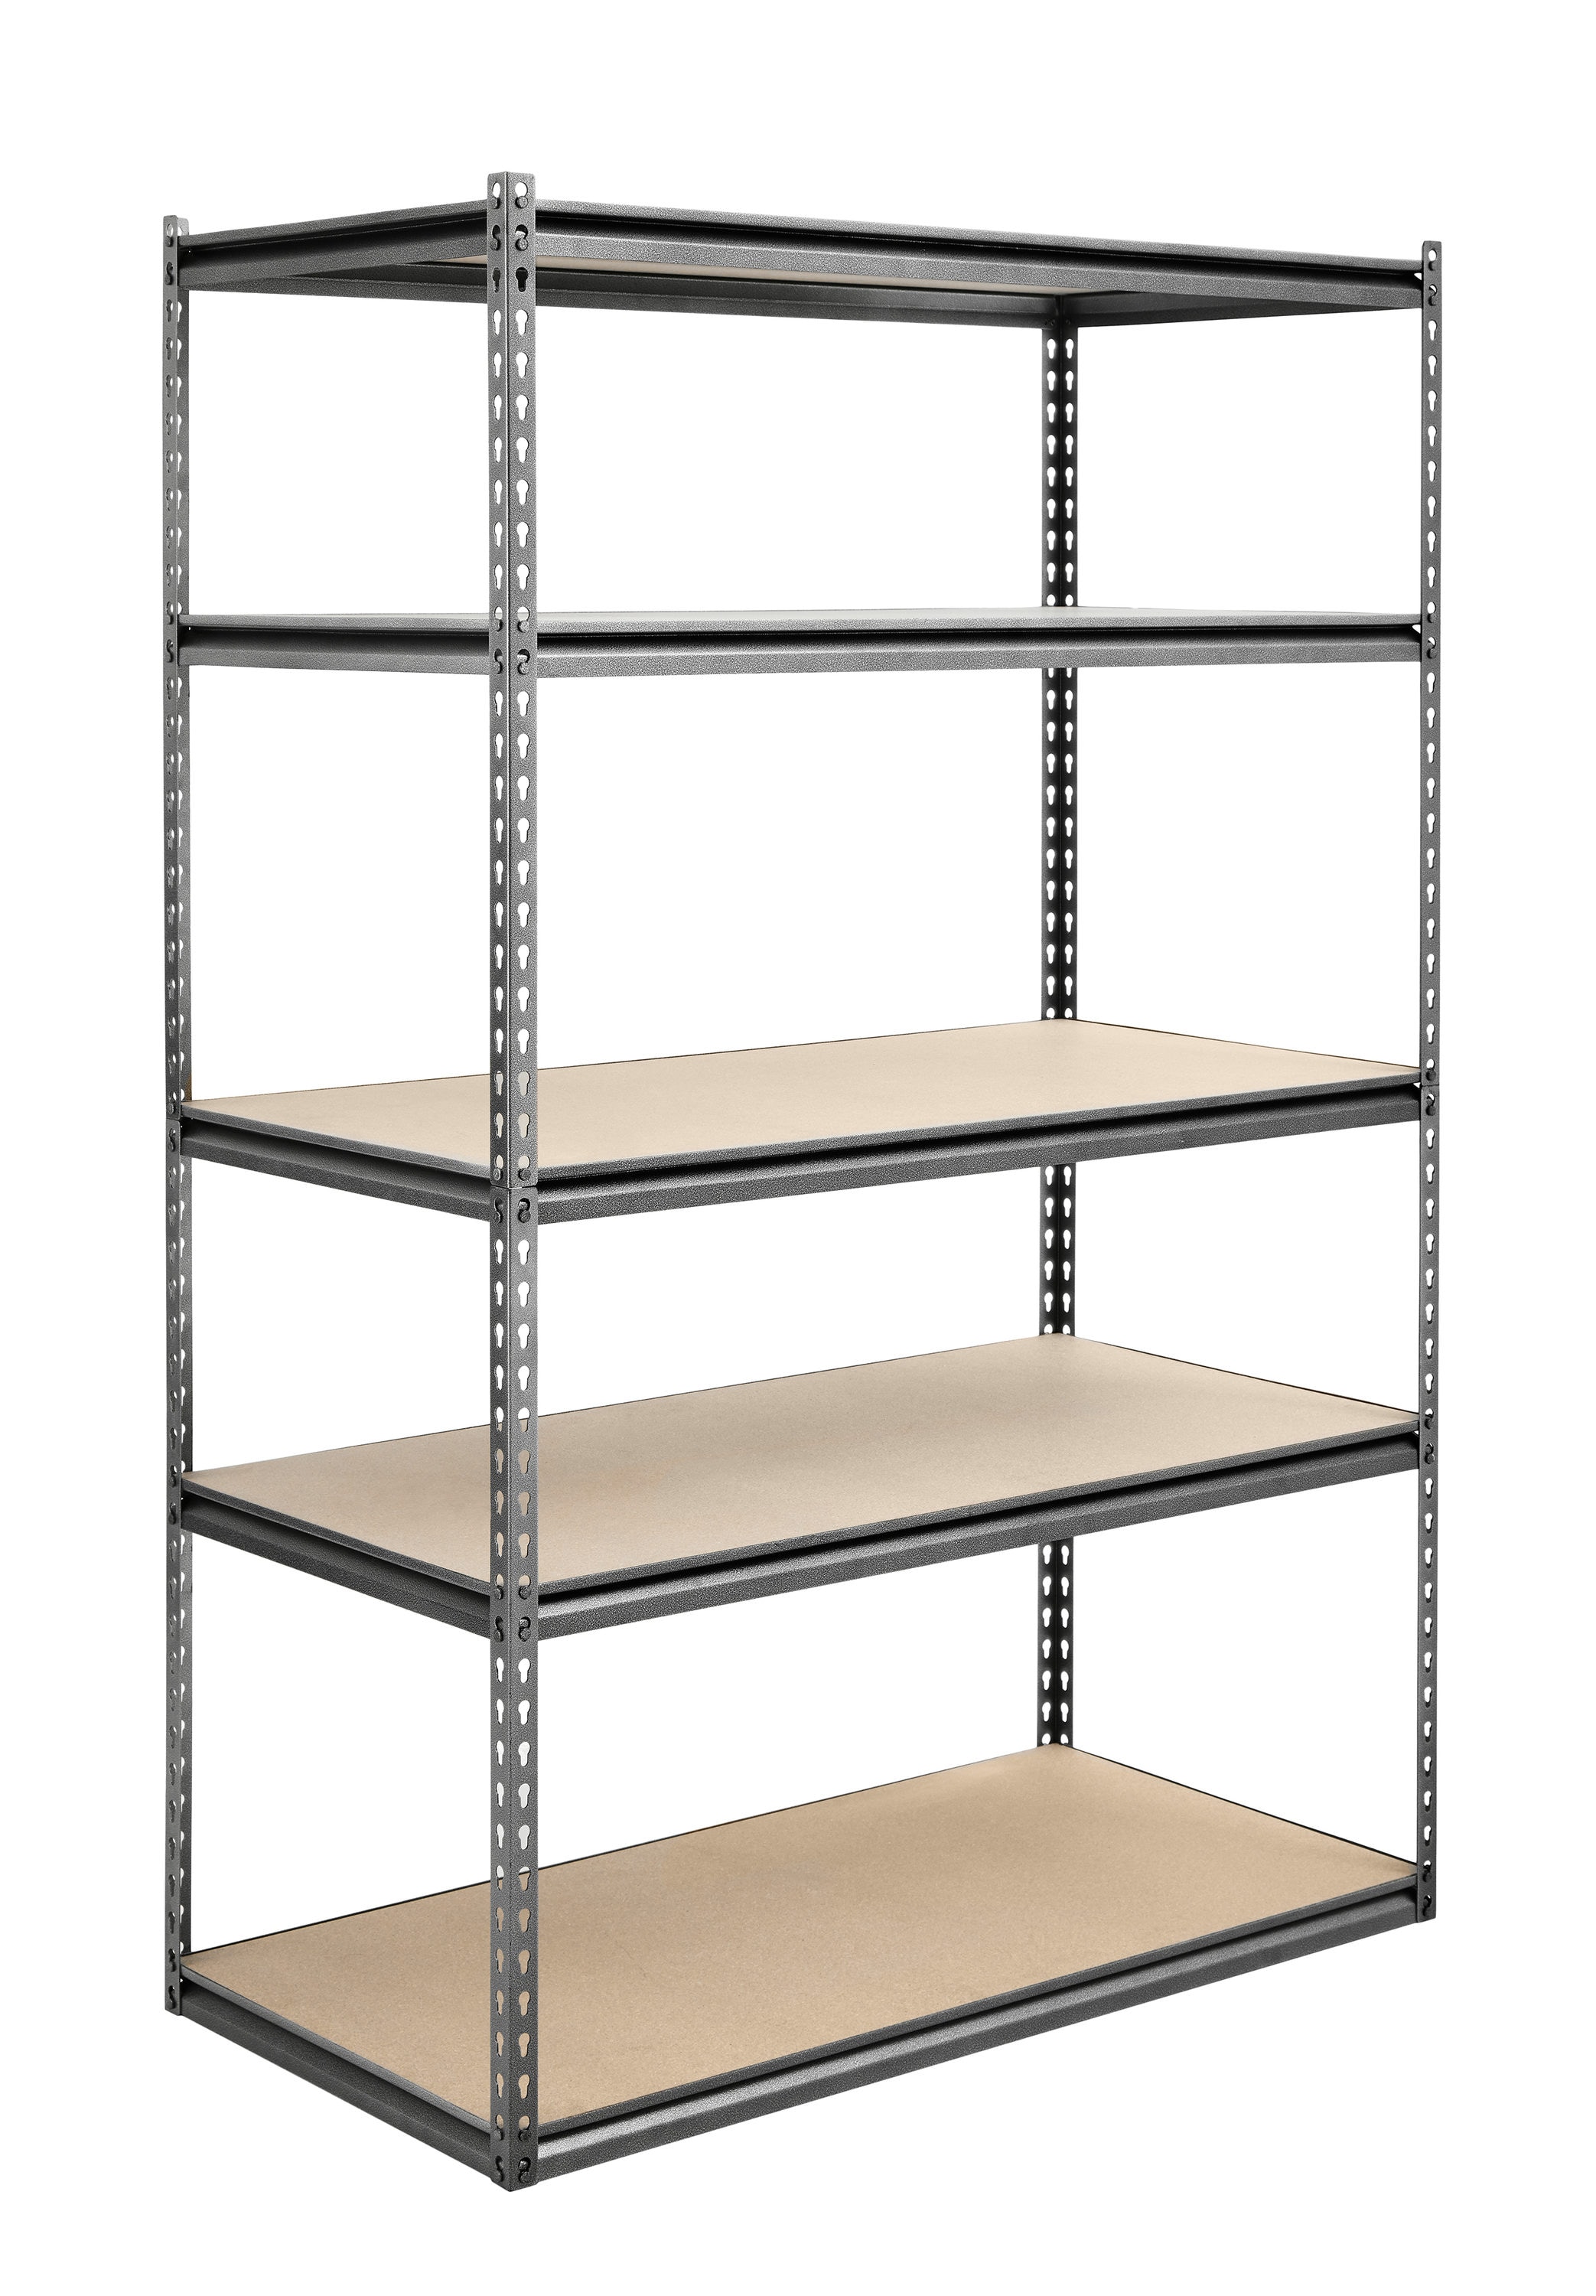 Steel Freestanding Shelving Units At, Metal Shelving Assembly Instructions